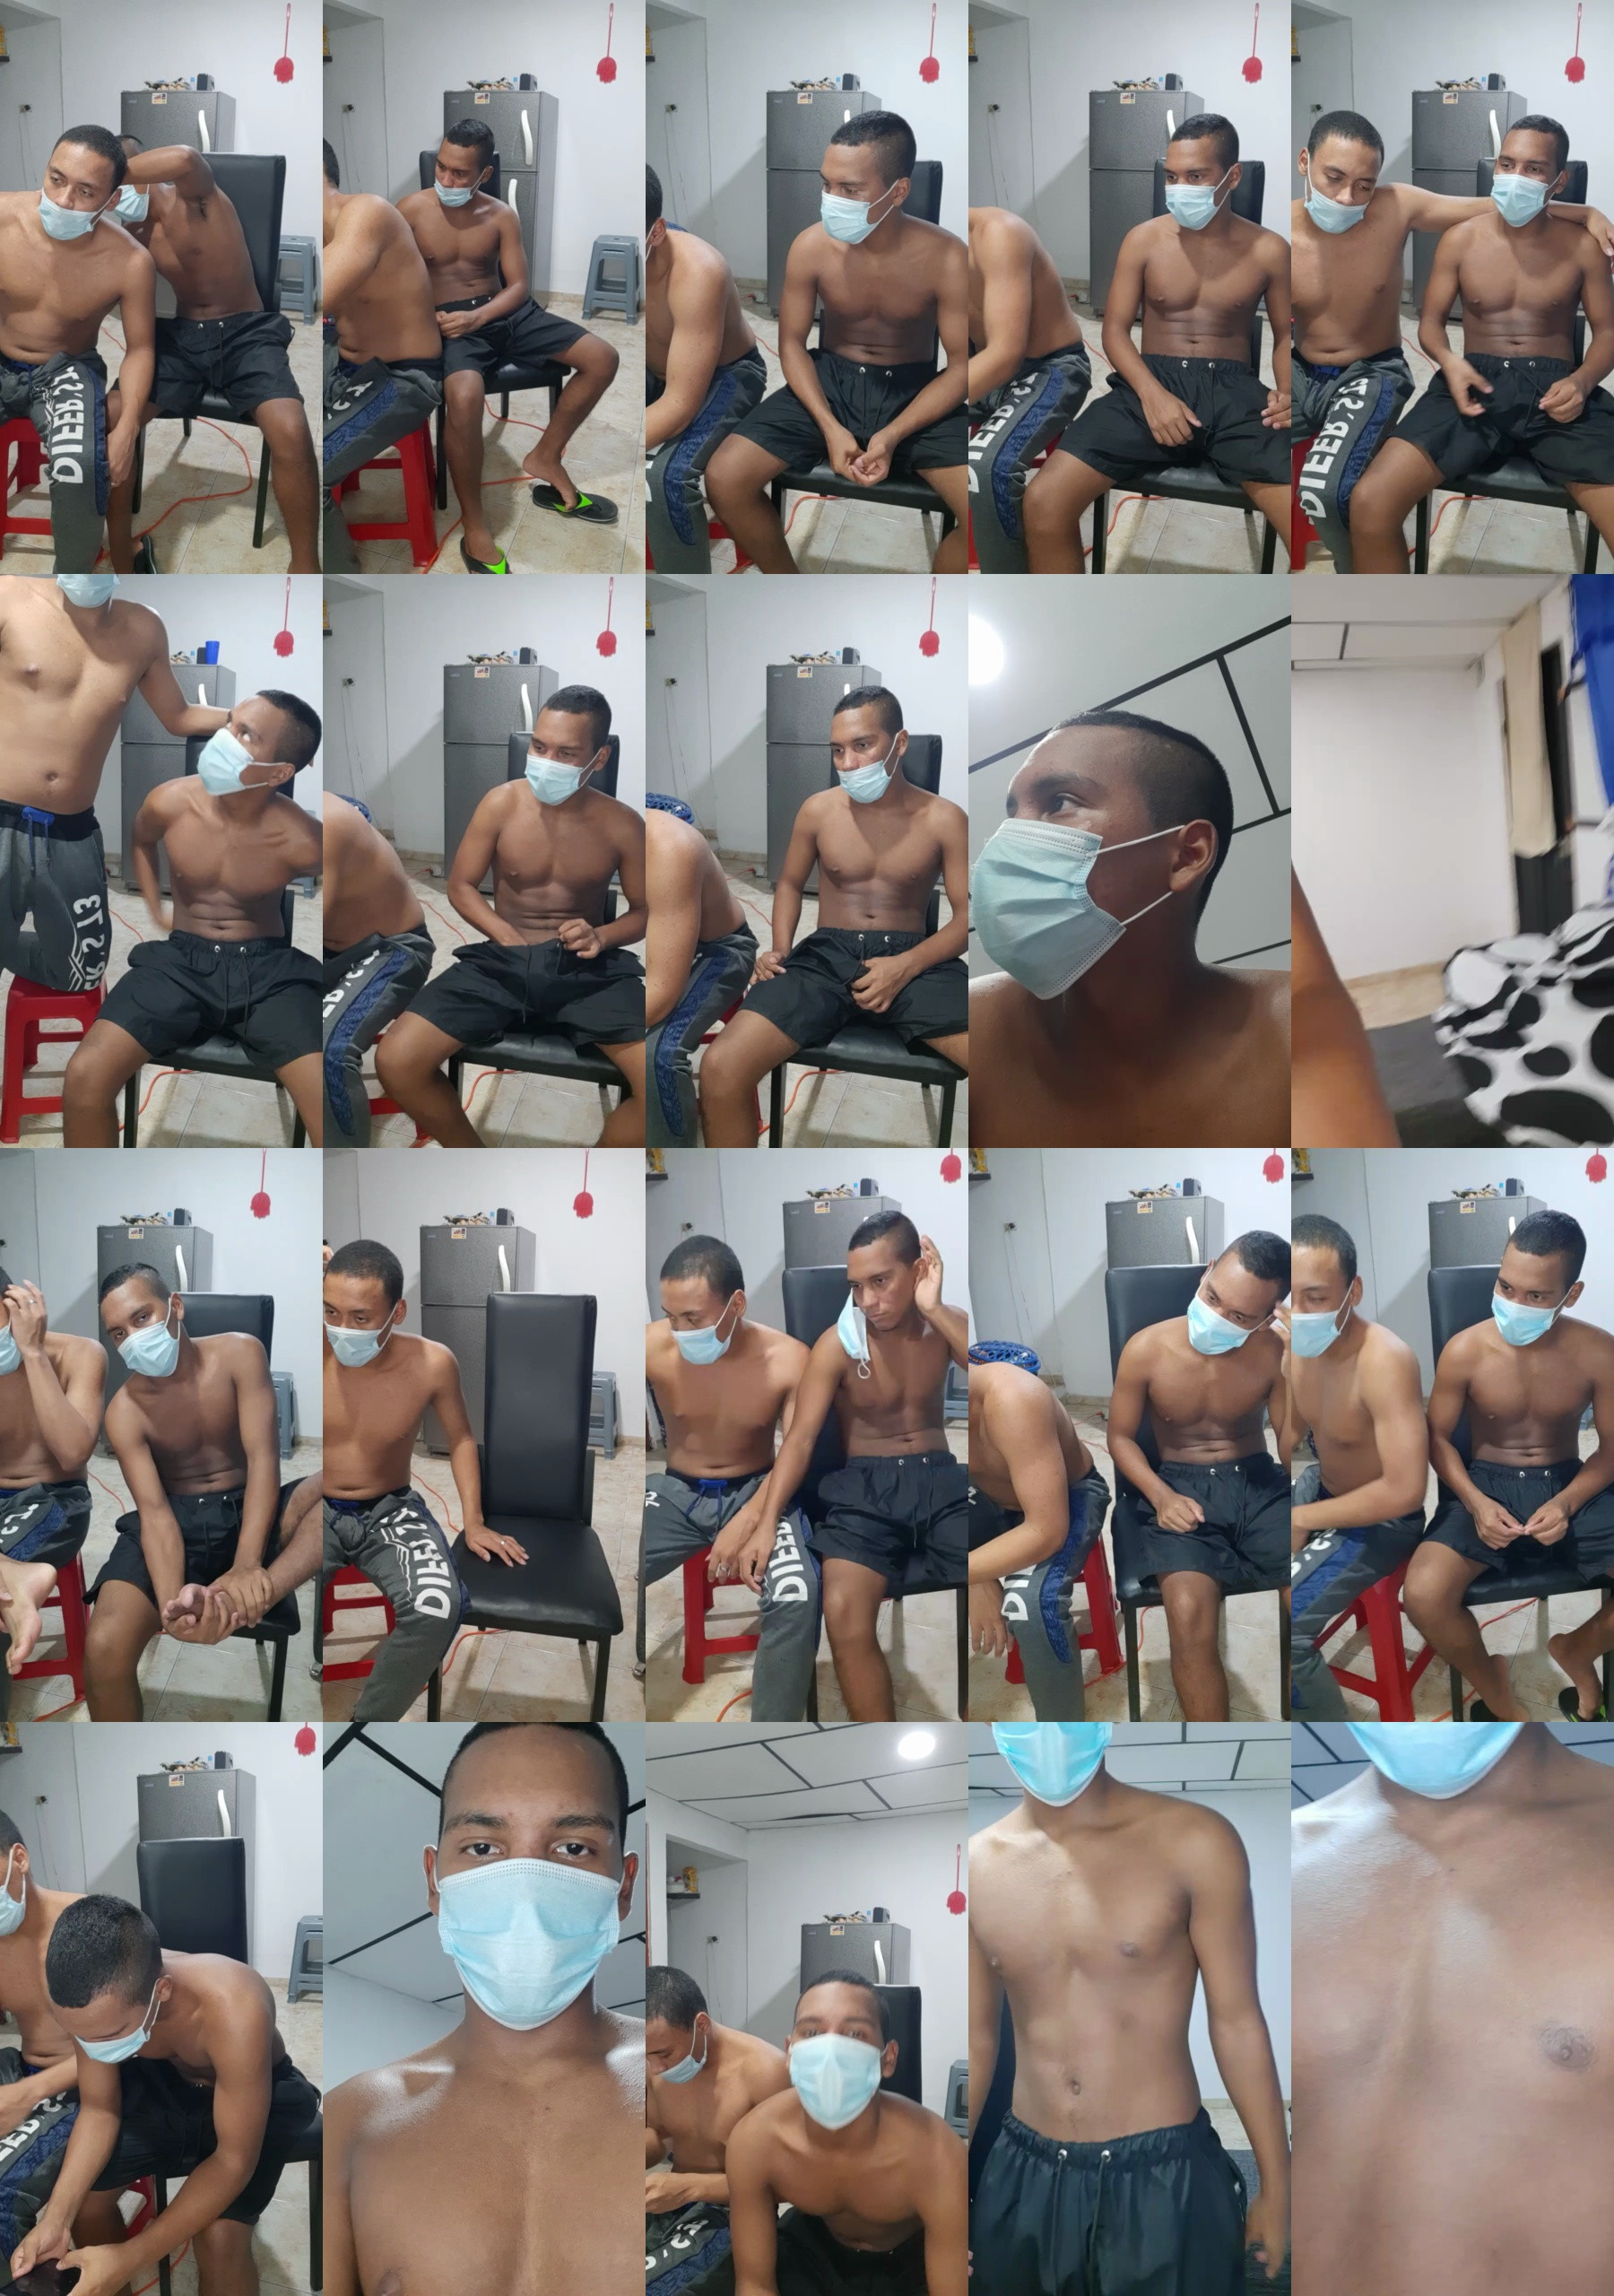 three_hot_guys  24-03-2021 Recorded Video Topless